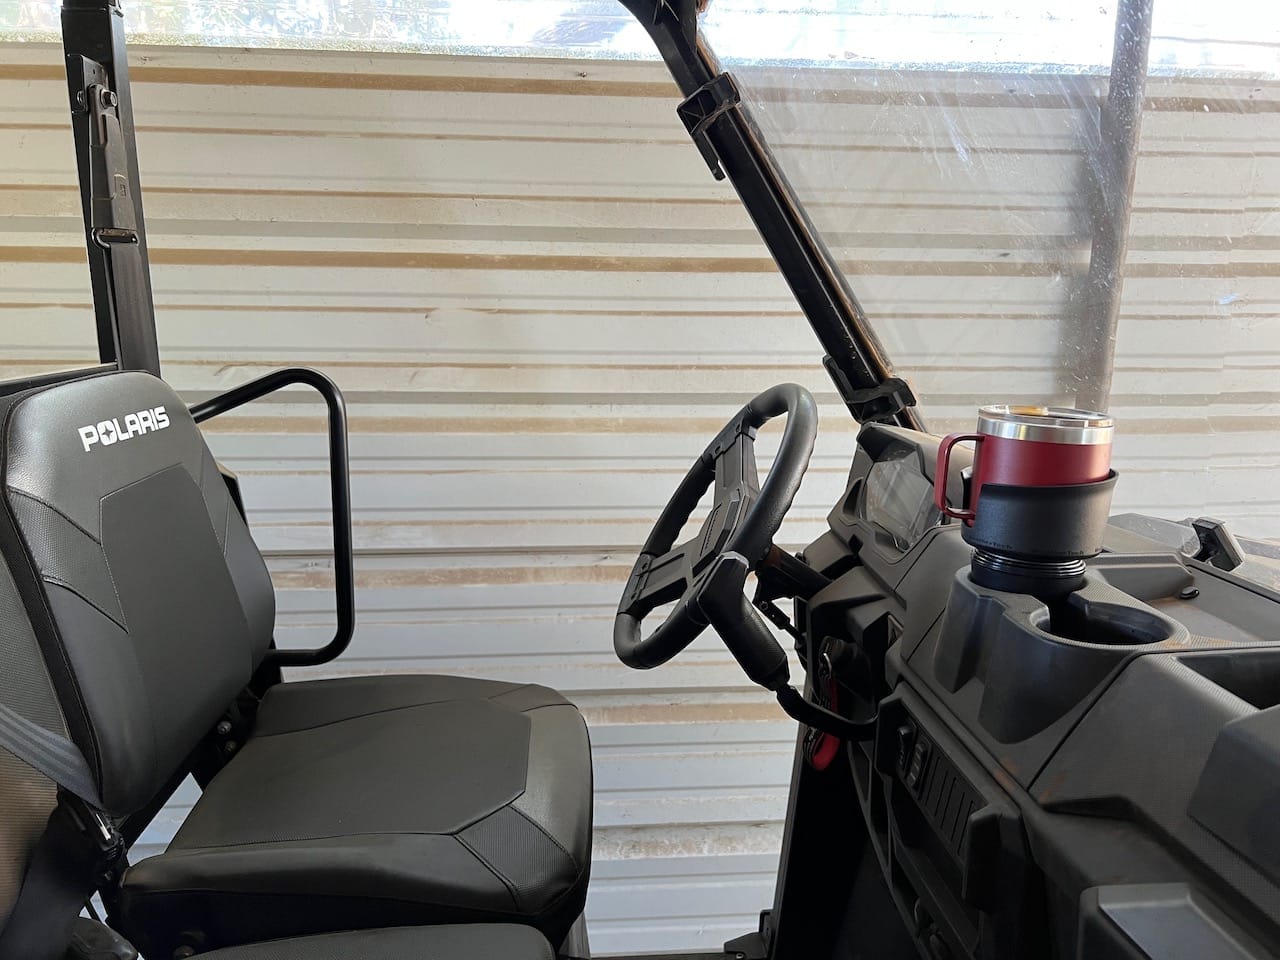 WeatherTech Cupcoffee fits perfectly in the Polaris Ranger UTV cup holder.